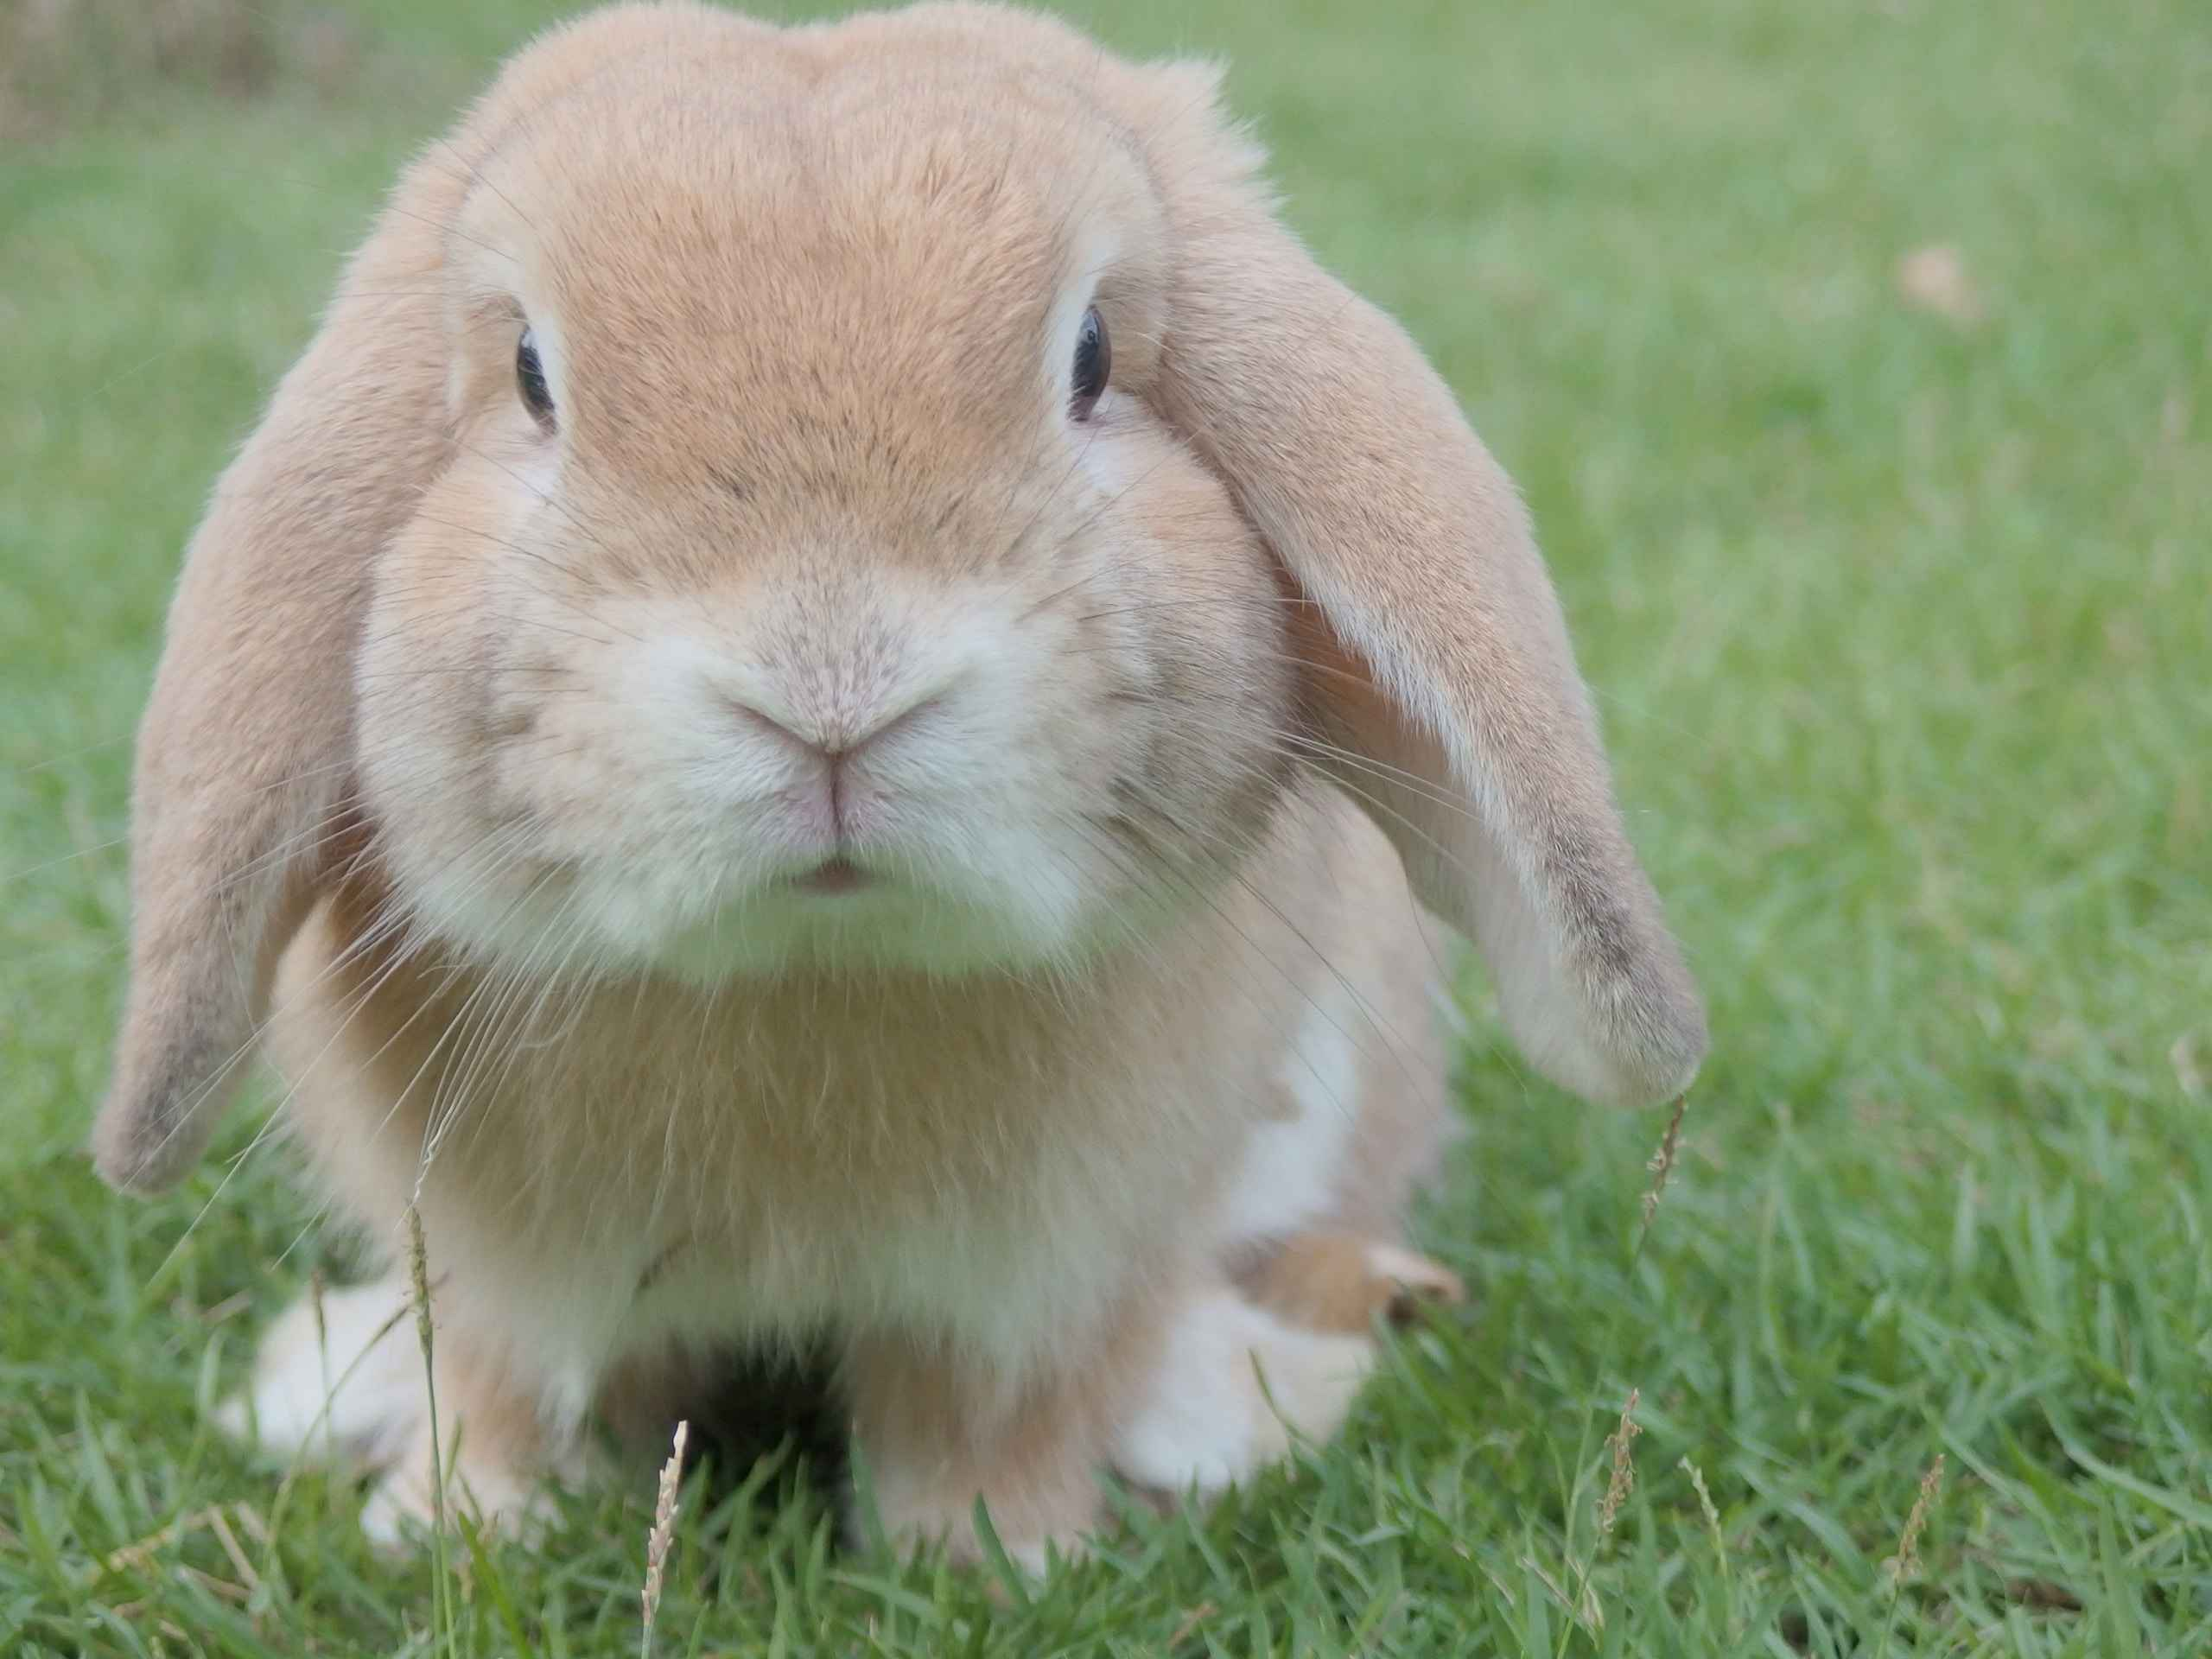 10 Tips to Keep Your Rabbit Entertained and Happy: Preventing Boredom in Your Pet Bunny